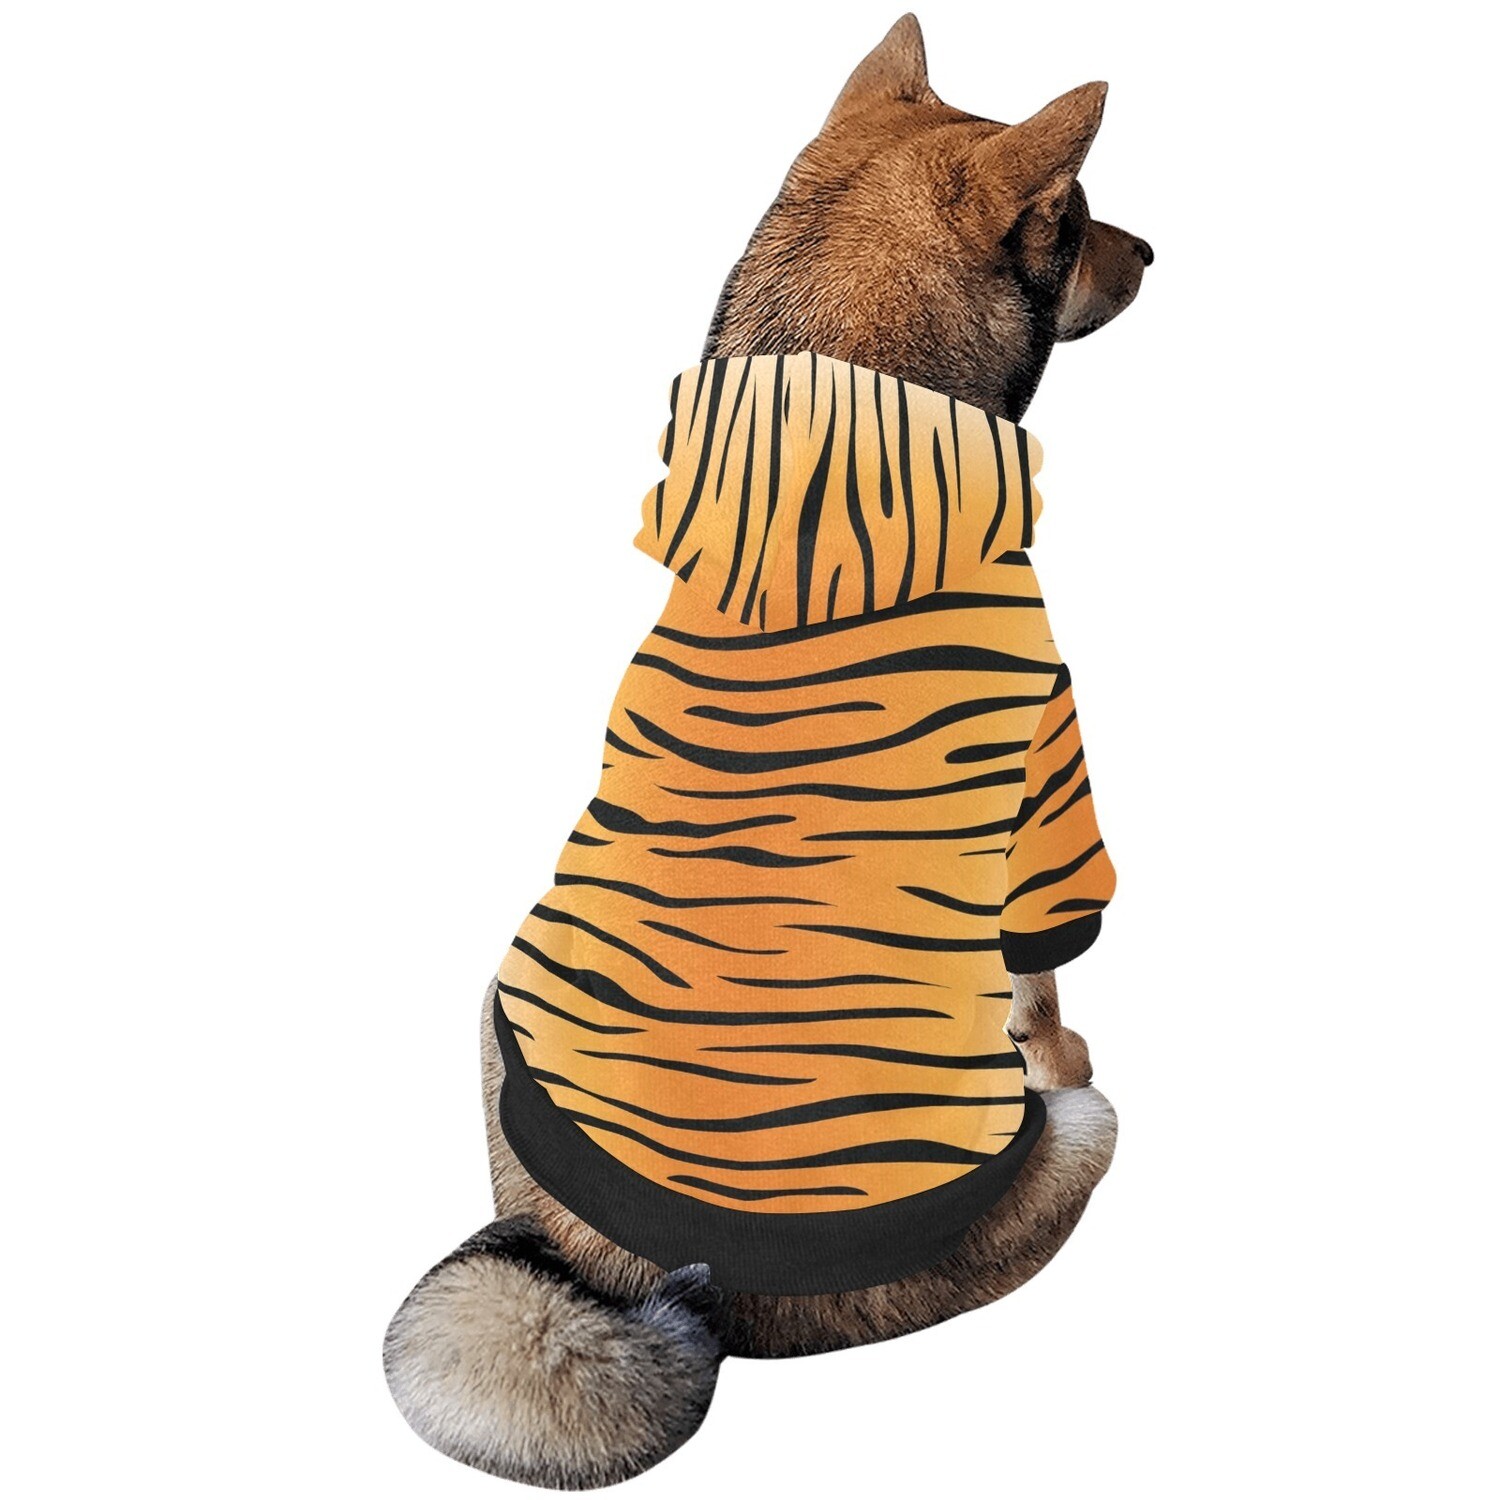 🐕🐅 Dog hoodie Tiger print, Royal Bengal Tigers, fuzzy warm buttoned dog hooded sweatshirt, dog hooded sweater, Dog clothes, Dog clothing, Dog apparel, Gift for dogs, Halloween